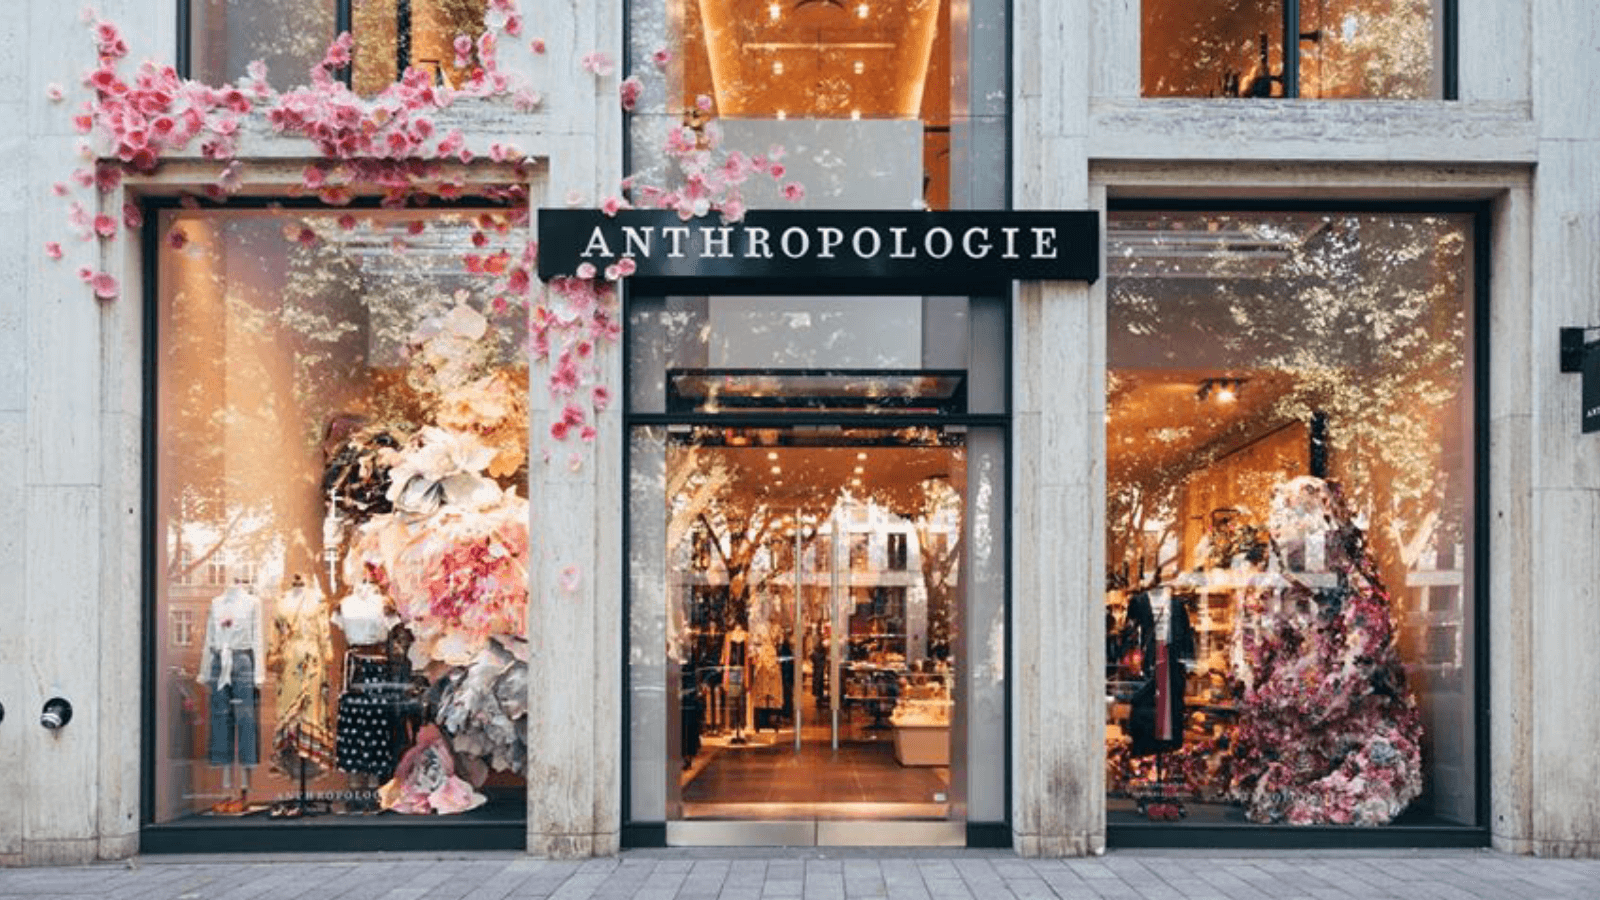 Anthropologie brand analysis example of the health of the brand.